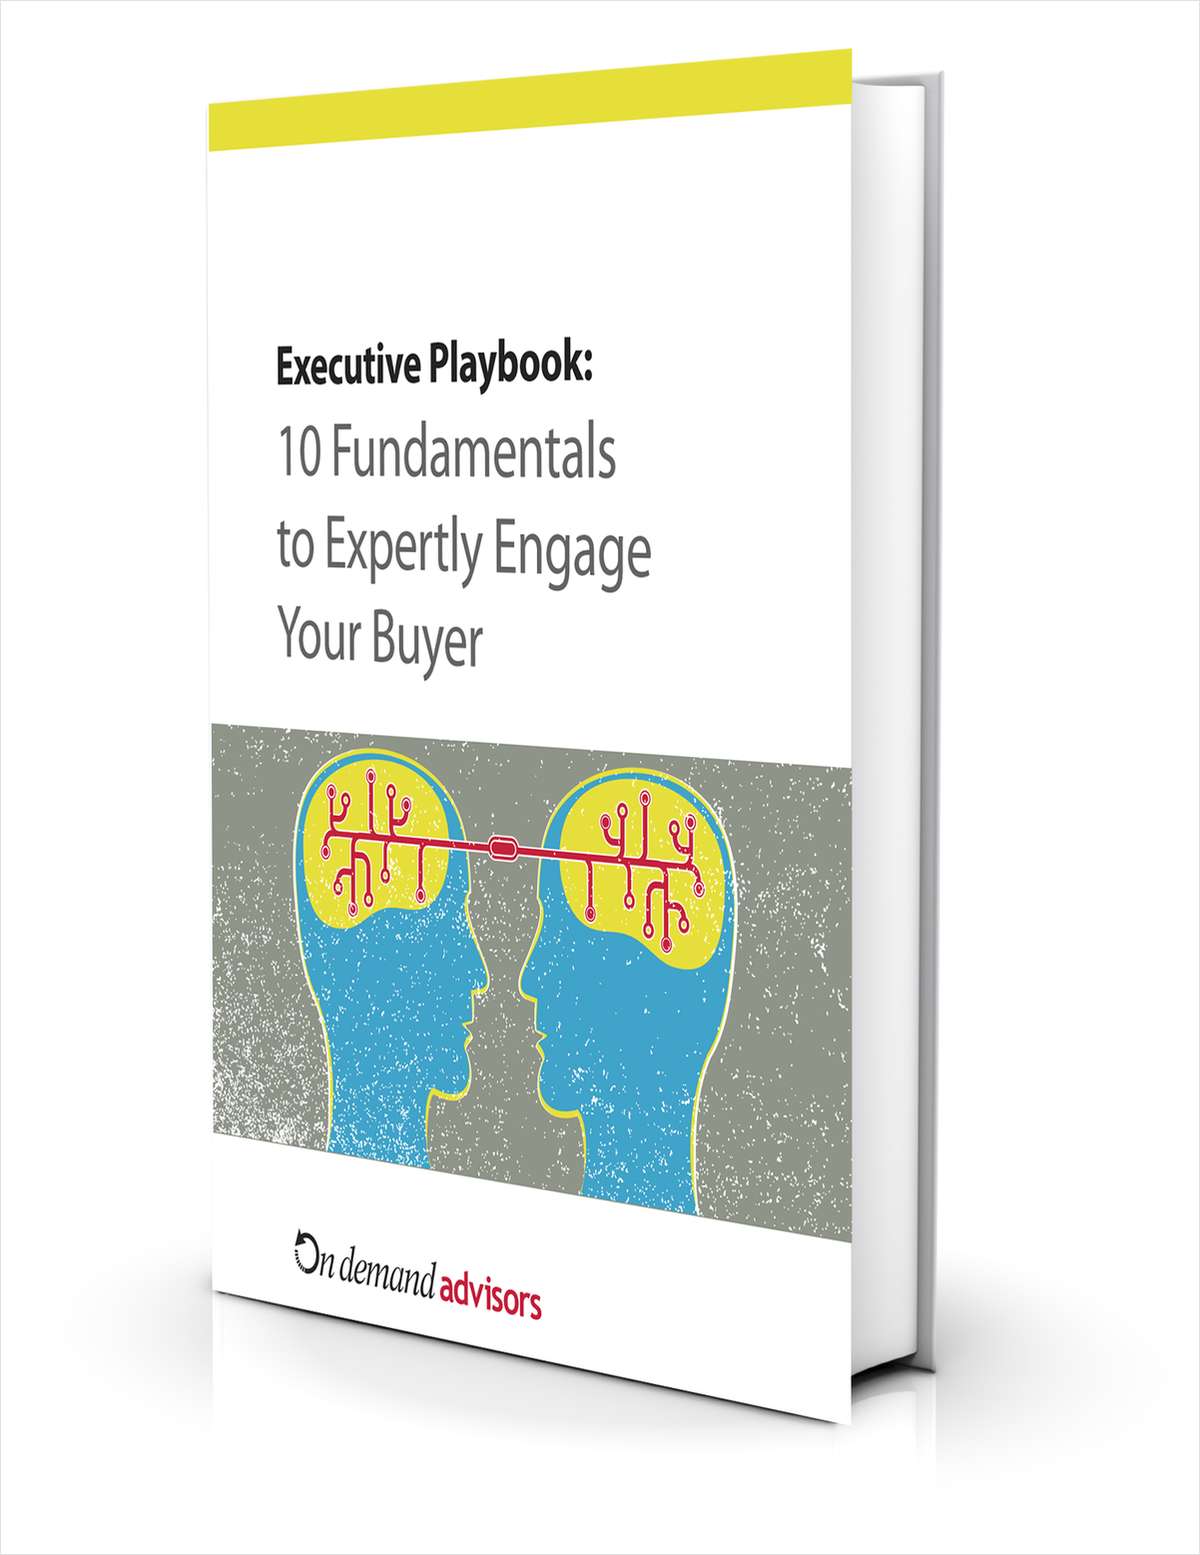 10 Fundamentals to Expertly Engage Your Buyer